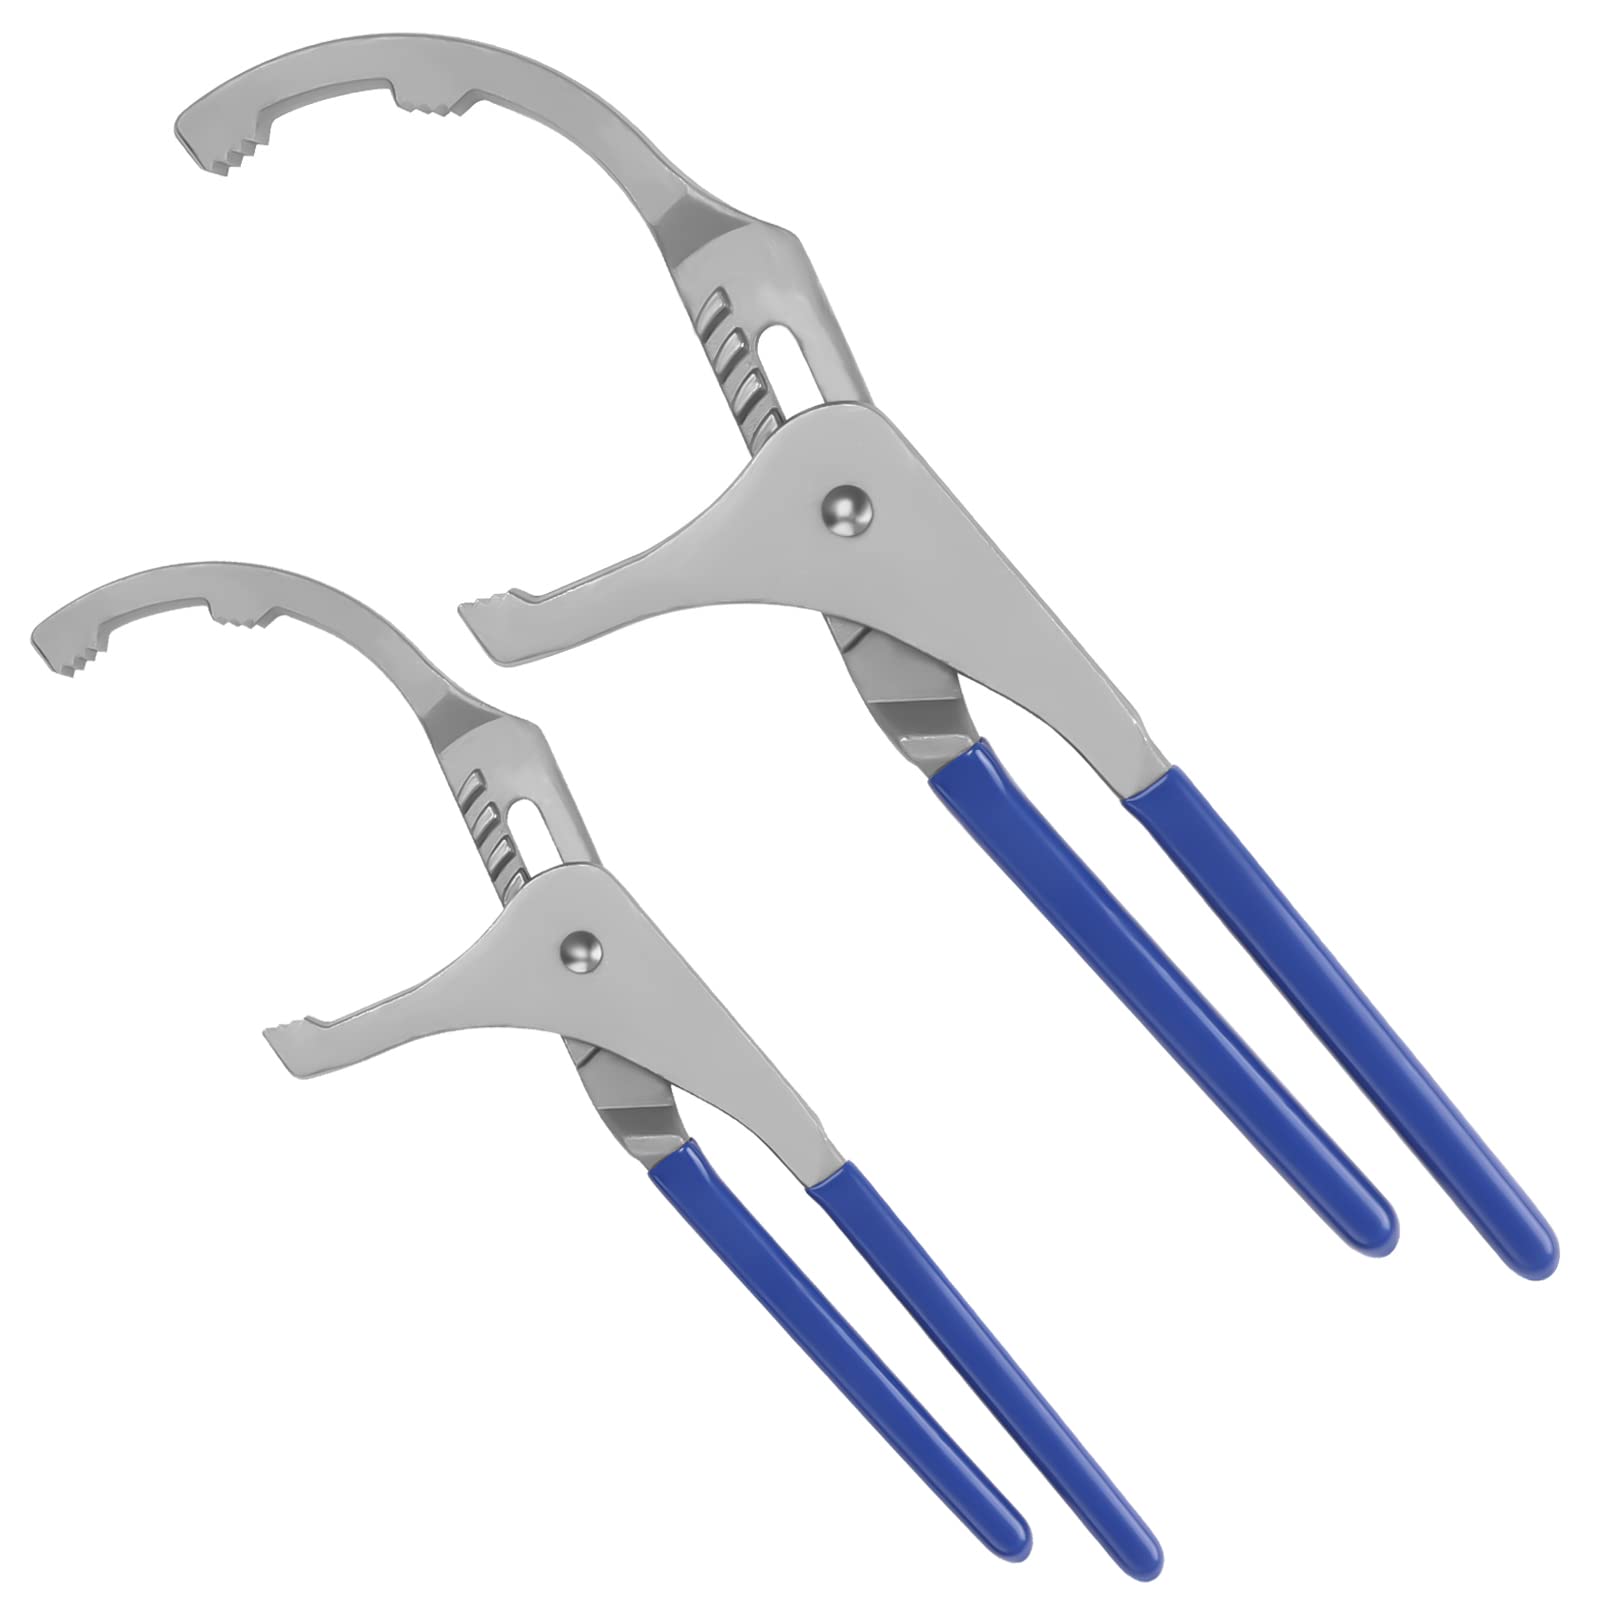 BETOOLL Oil Filter Wrench - 9" & 12" Adjustable Oil Filter Pliers - Oil Filter Removal Tool 2pcs for Pulling Oil Filters from Ca